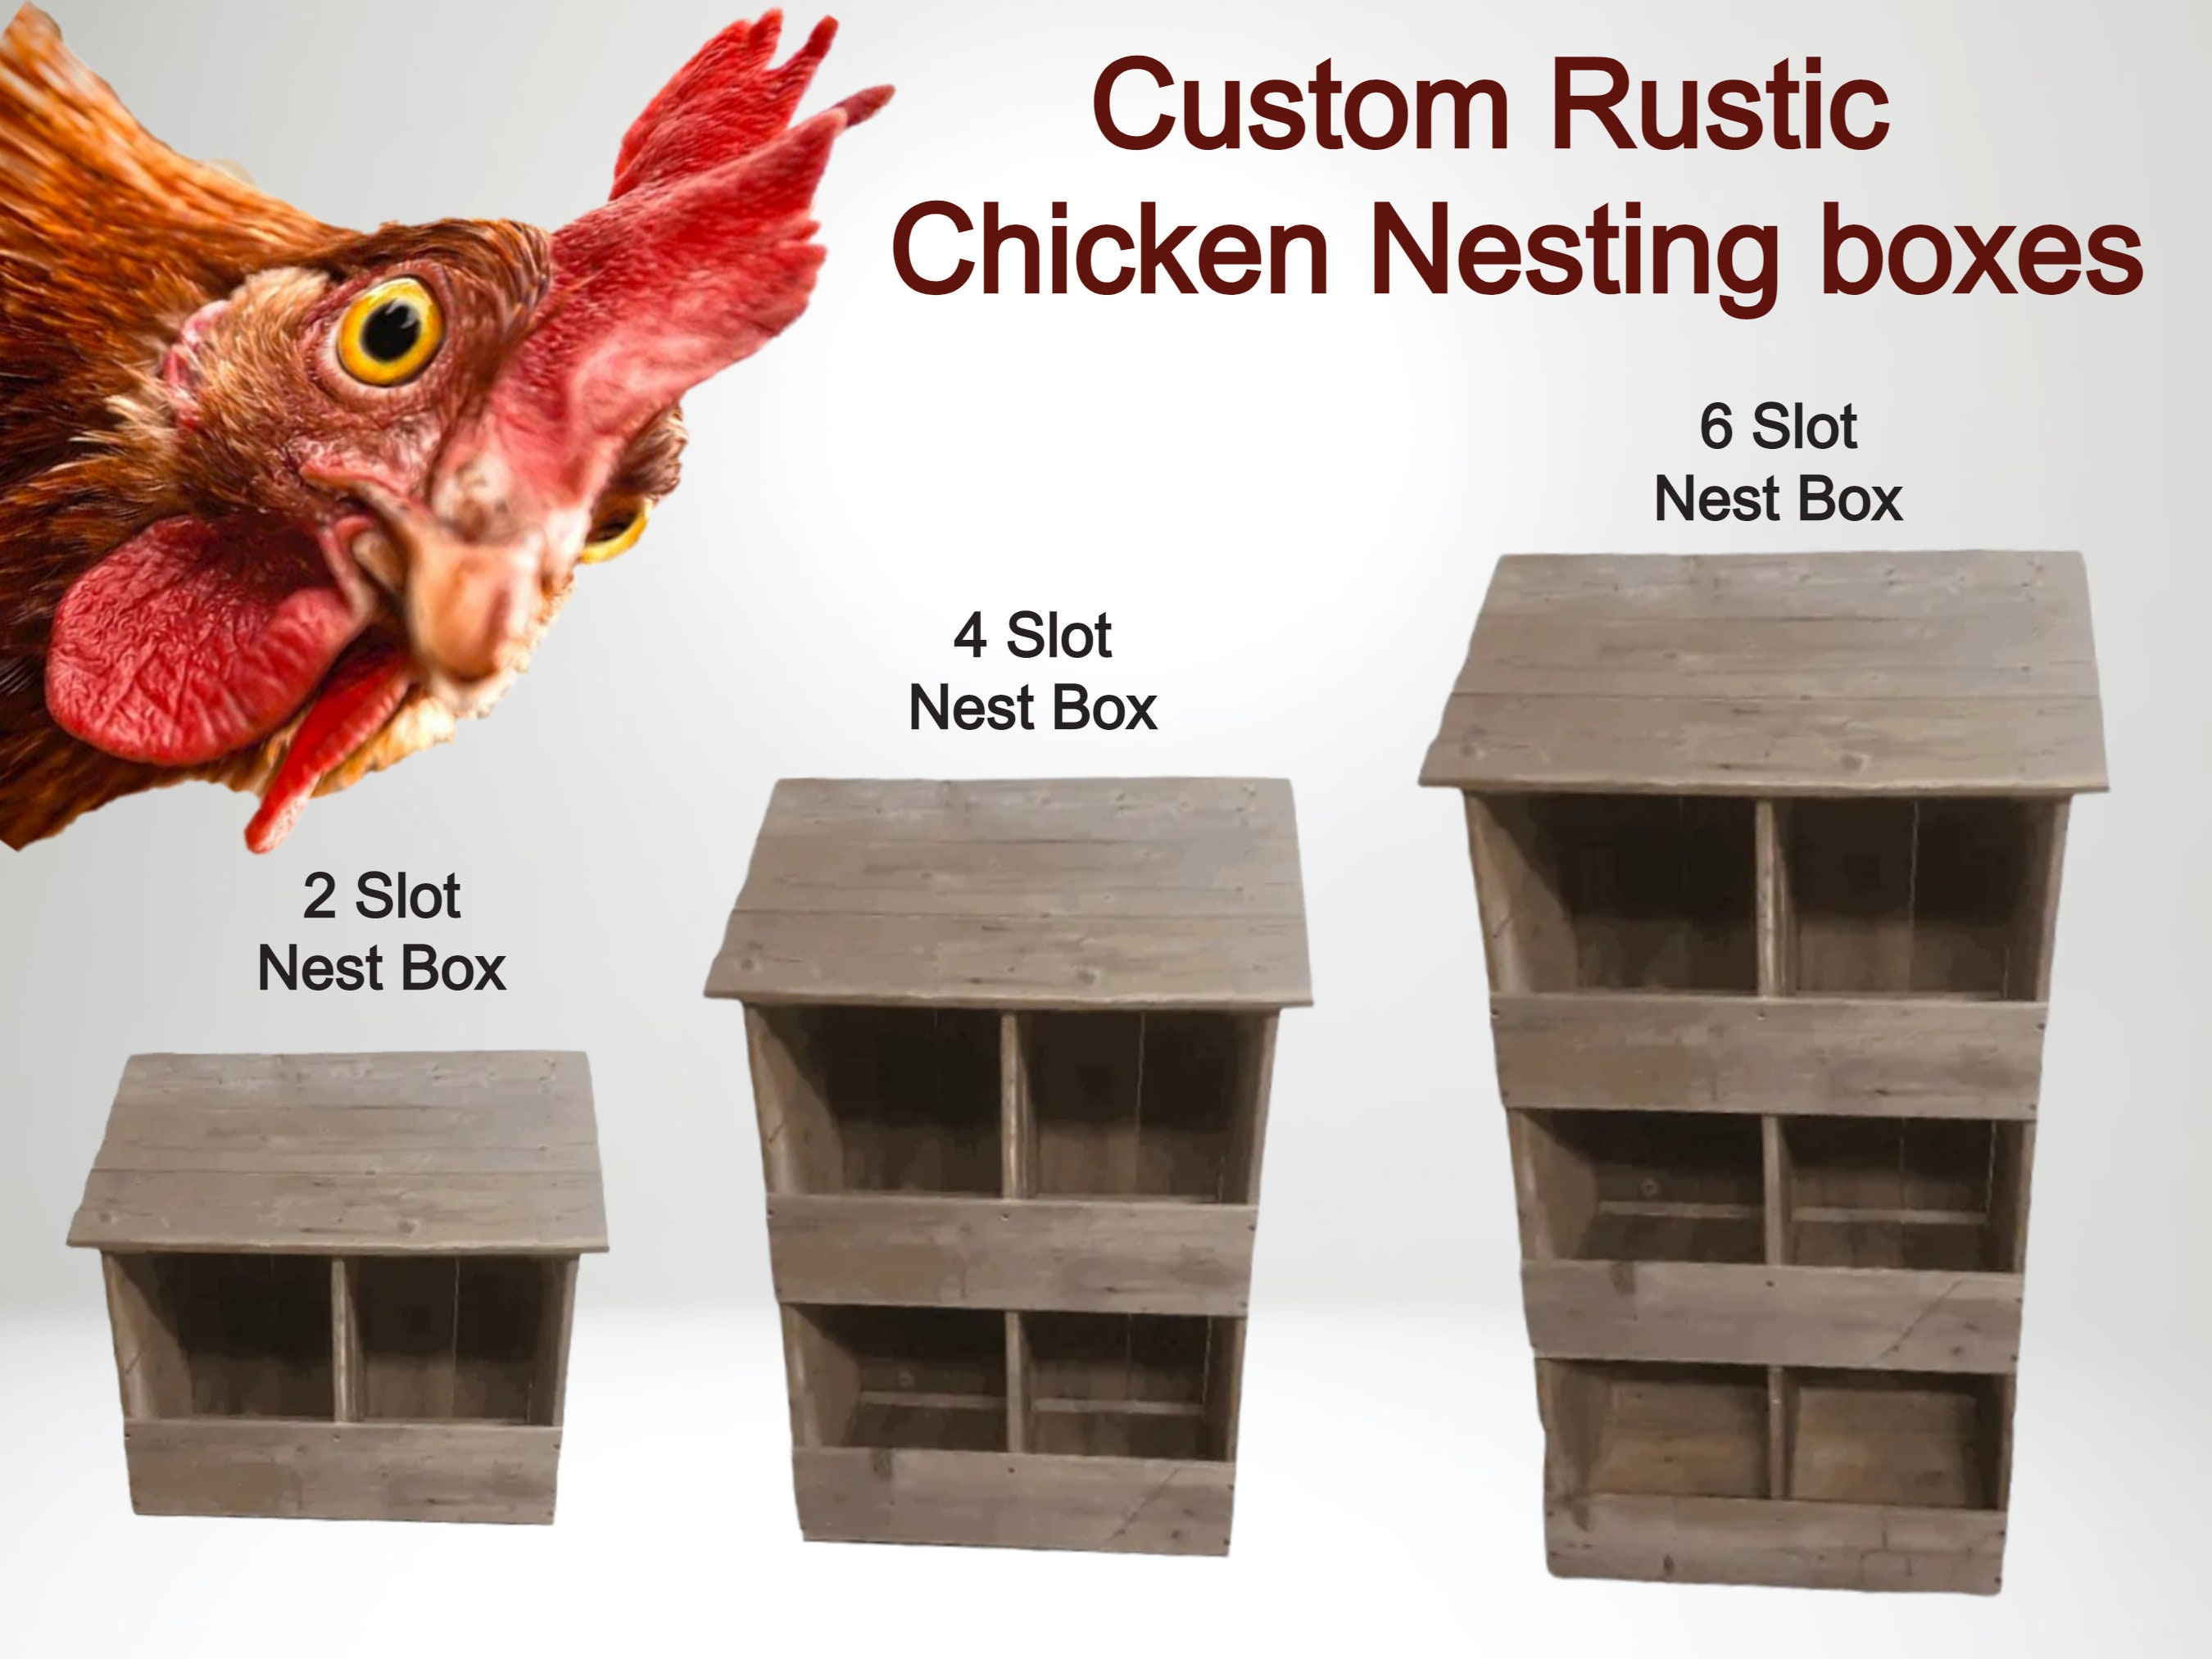 Chicken Nesting Boxes for Sale